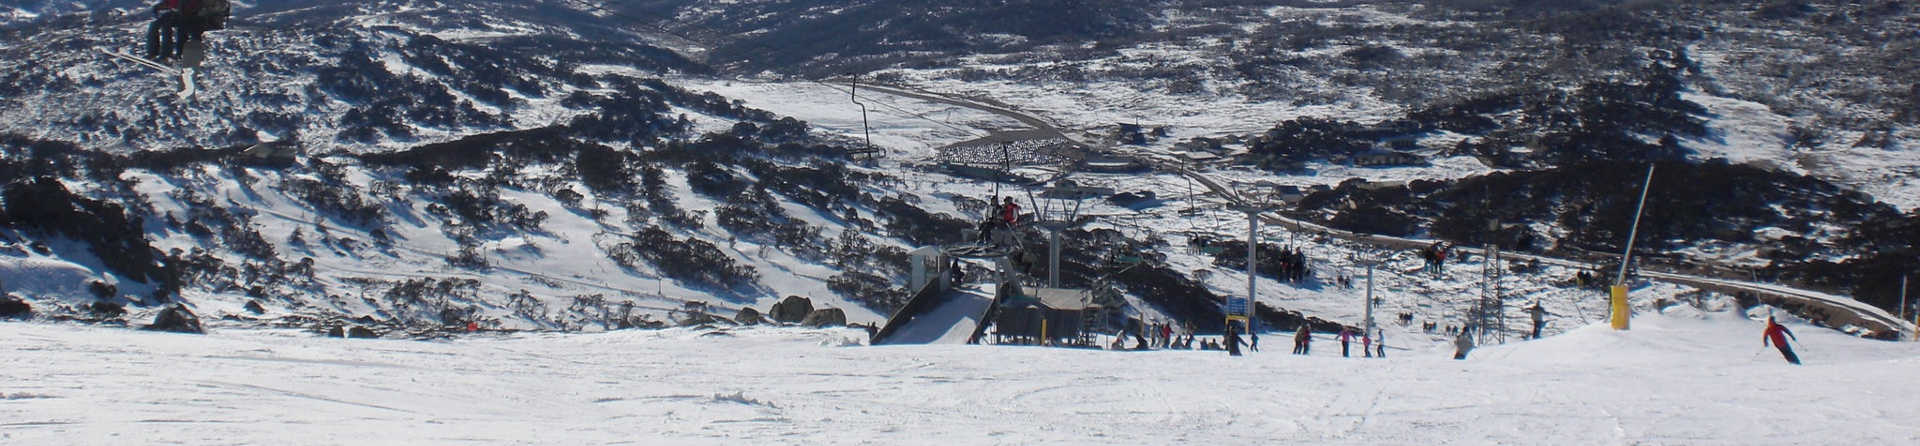 What months does it snow in Thredbo?